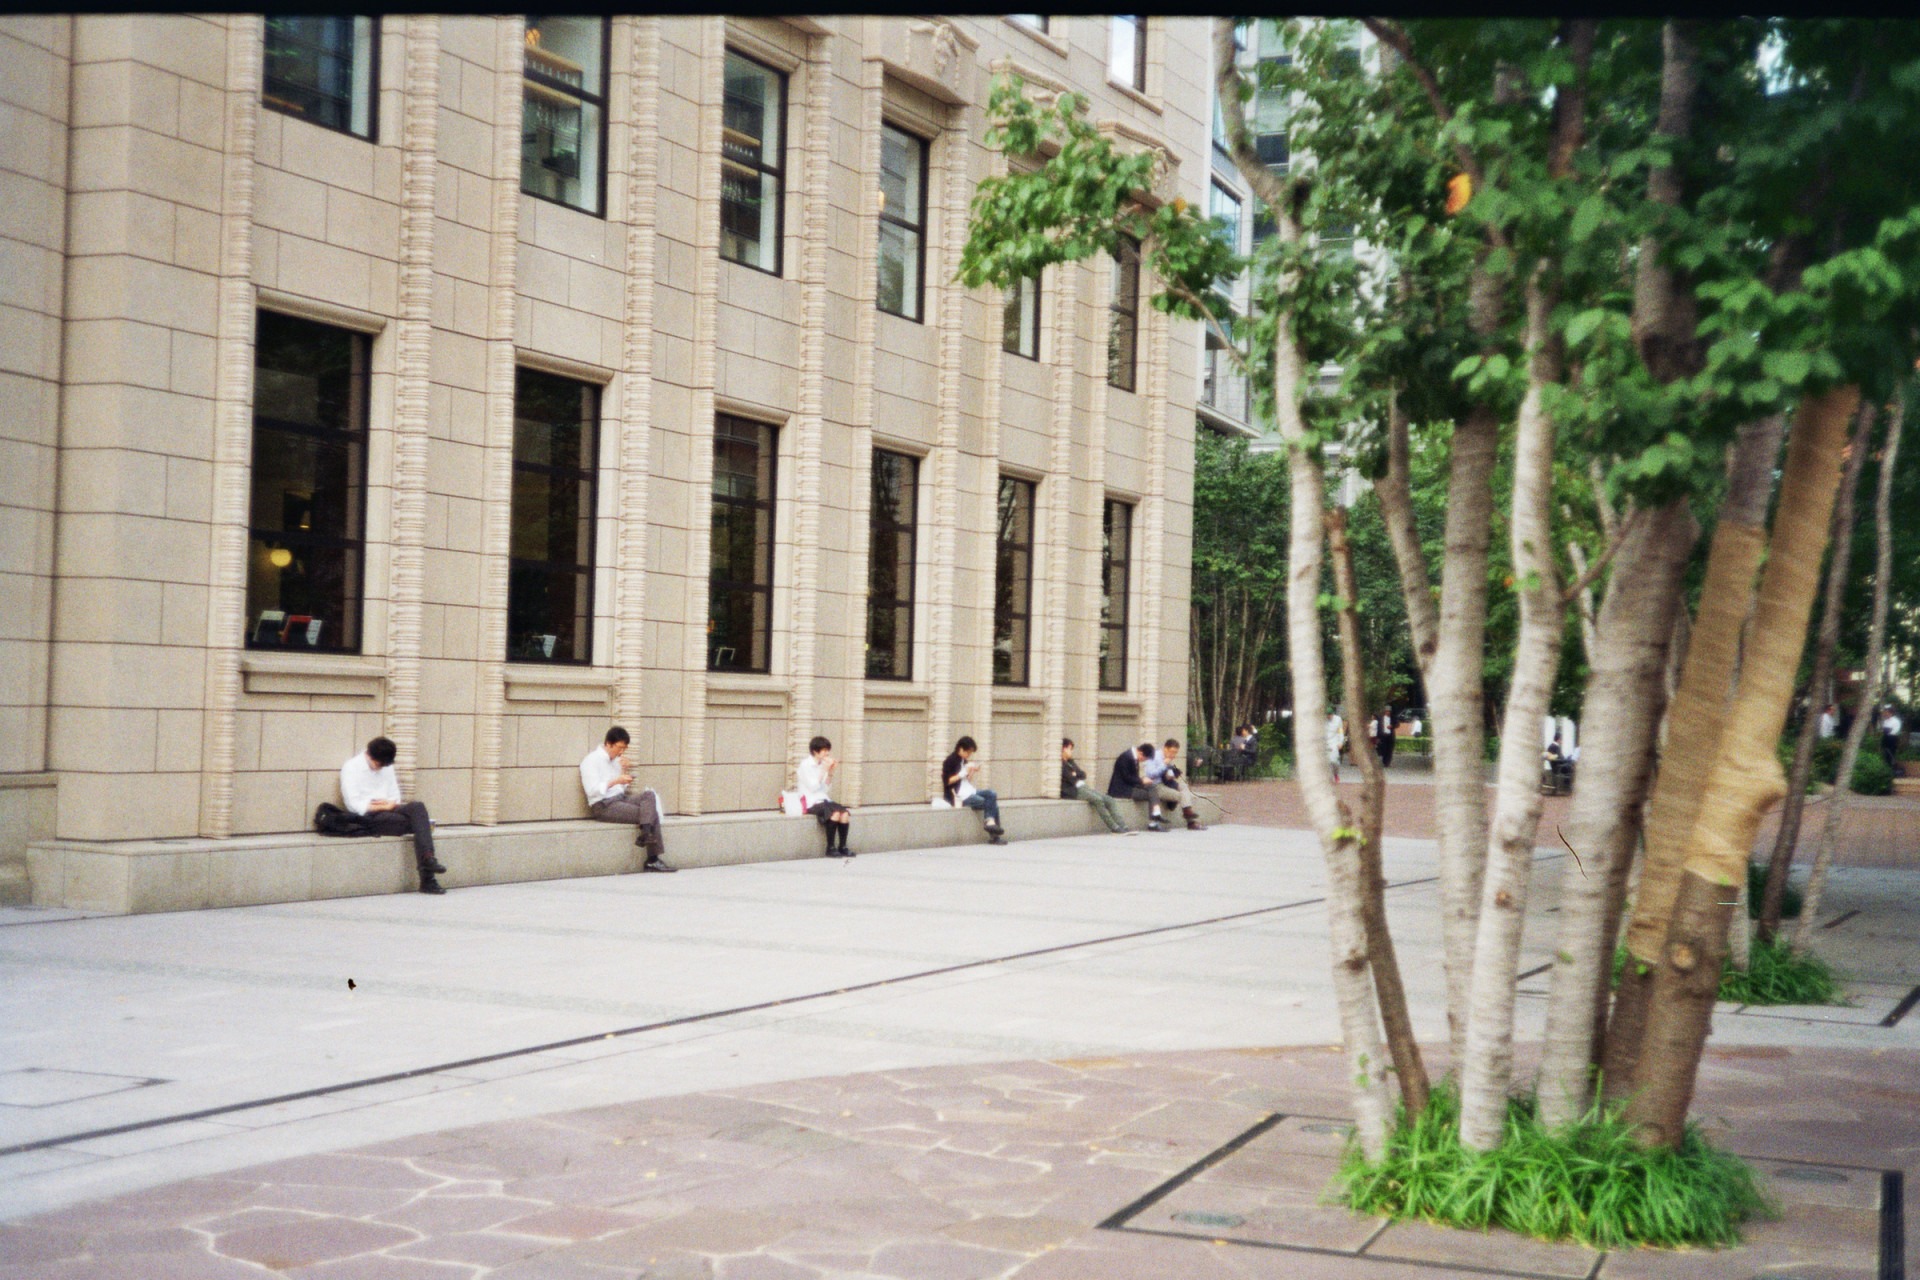 people sitting next to a building and eating their lunch, they sit almost equidistant from each other, a person below each window of the building